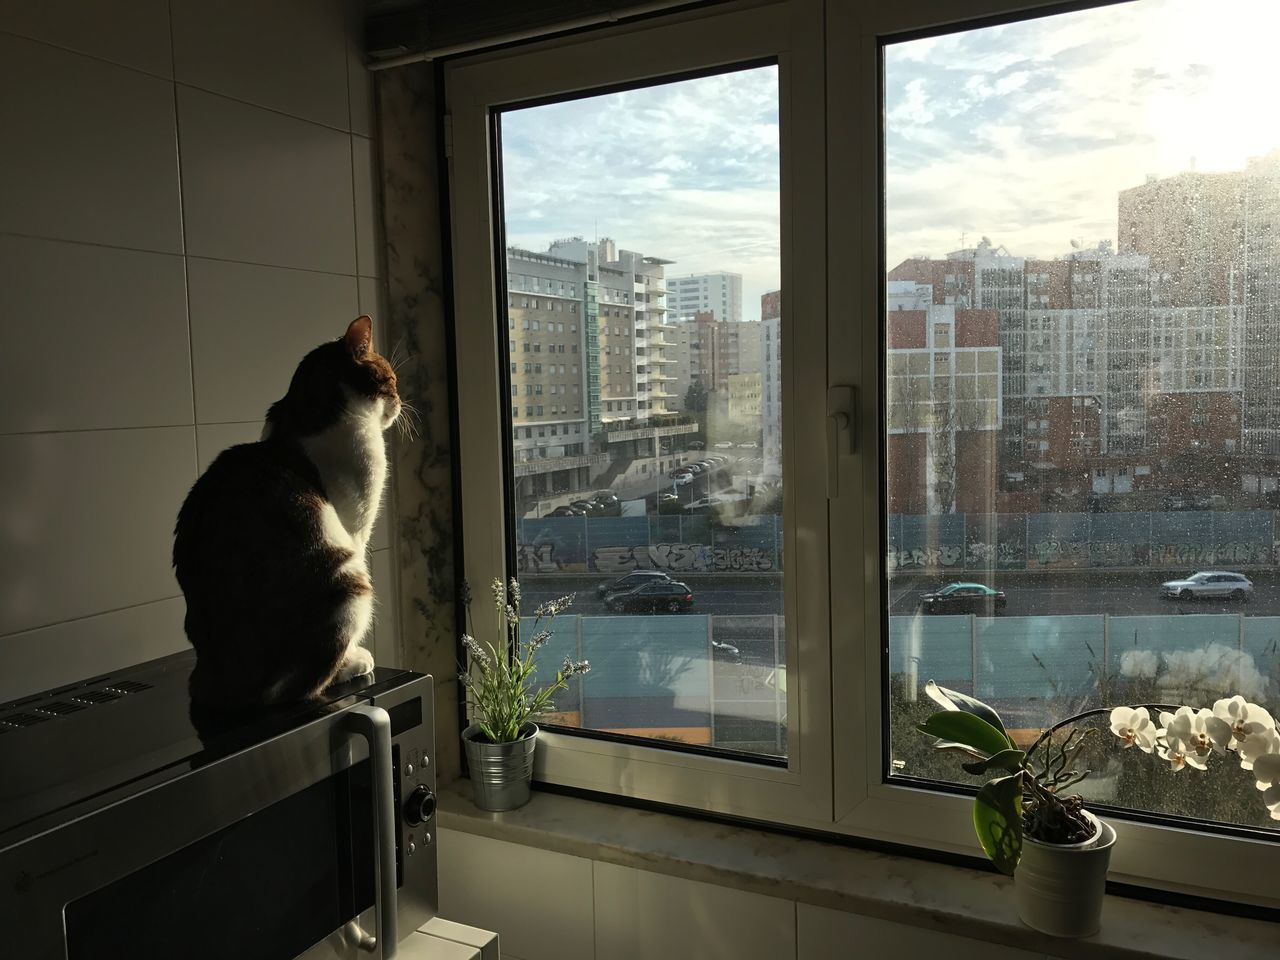 domestic cat, window, pets, animal themes, domestic animals, one animal, indoors, mammal, cat, feline, window sill, looking through window, day, built structure, sky, home interior, water, cloud - sky, sunlight, nature, no people, architecture, cityscape, city